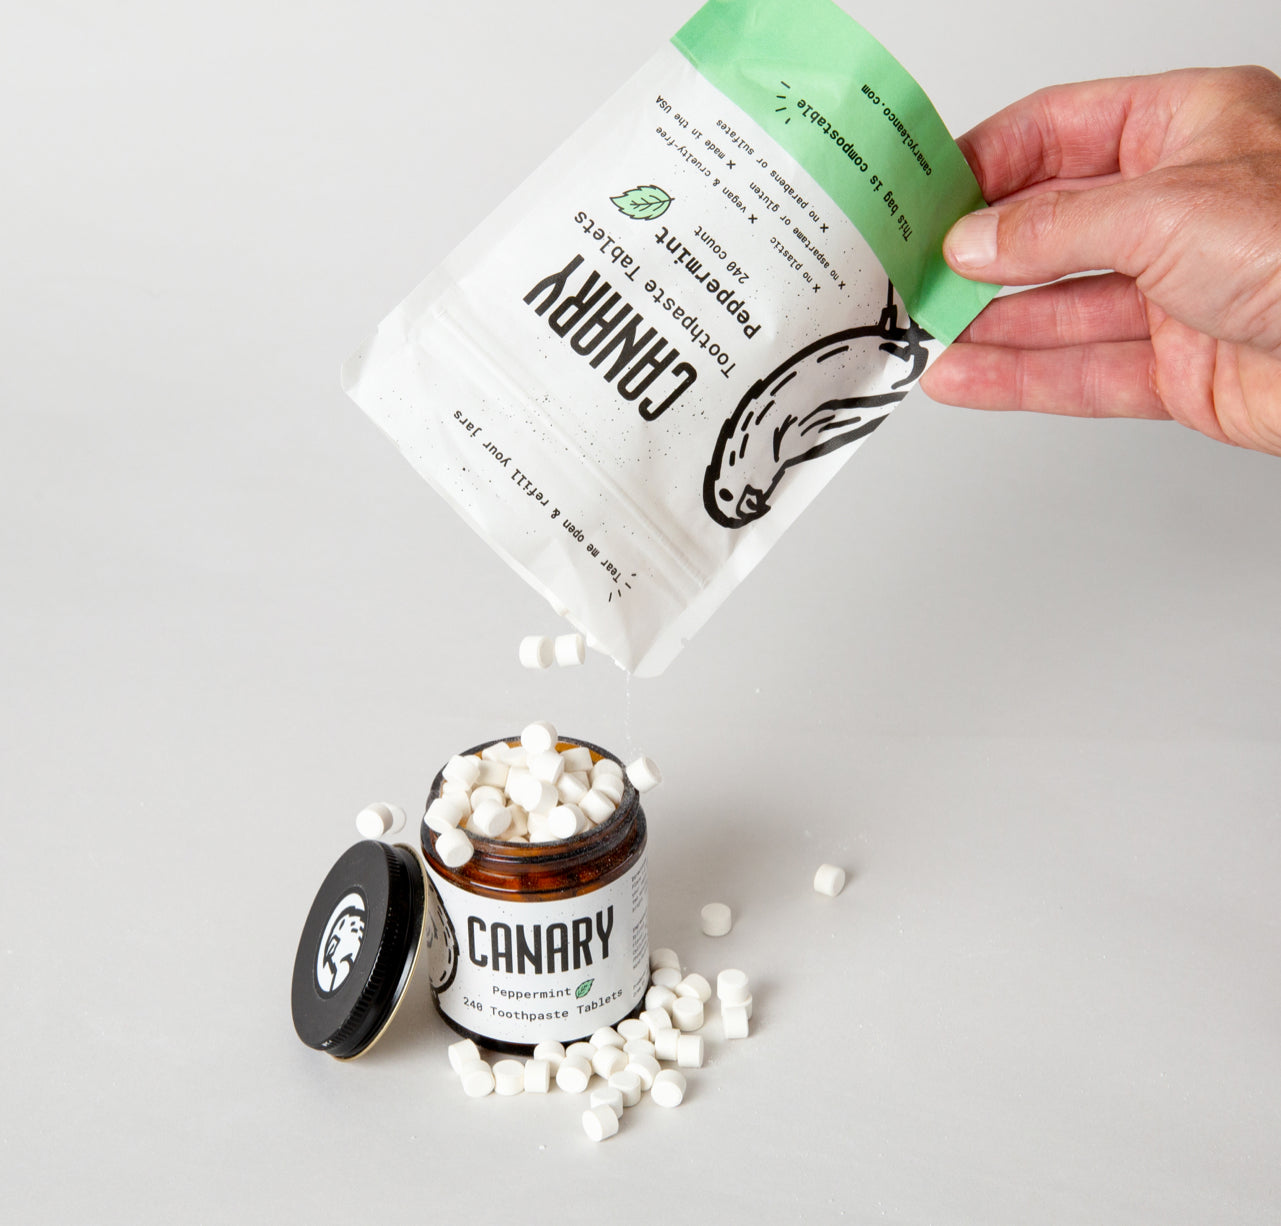 When you subscribe we'll send you a compostable refill pack of toothpaste tablets to refill your glass jars 